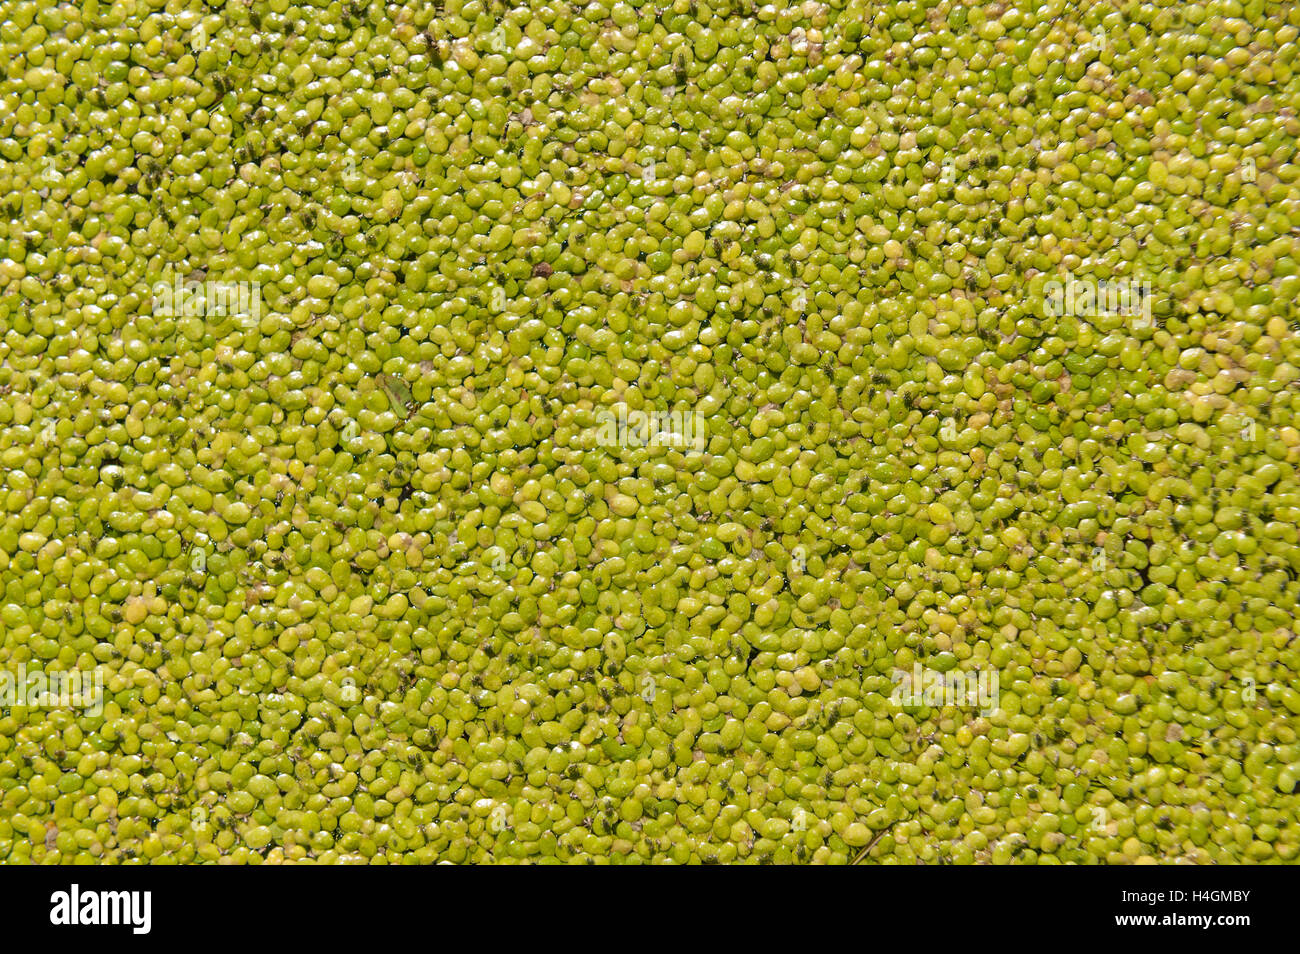 Pond surface coated with dense covering of duckweed Lemna minuta floating weed Stock Photo